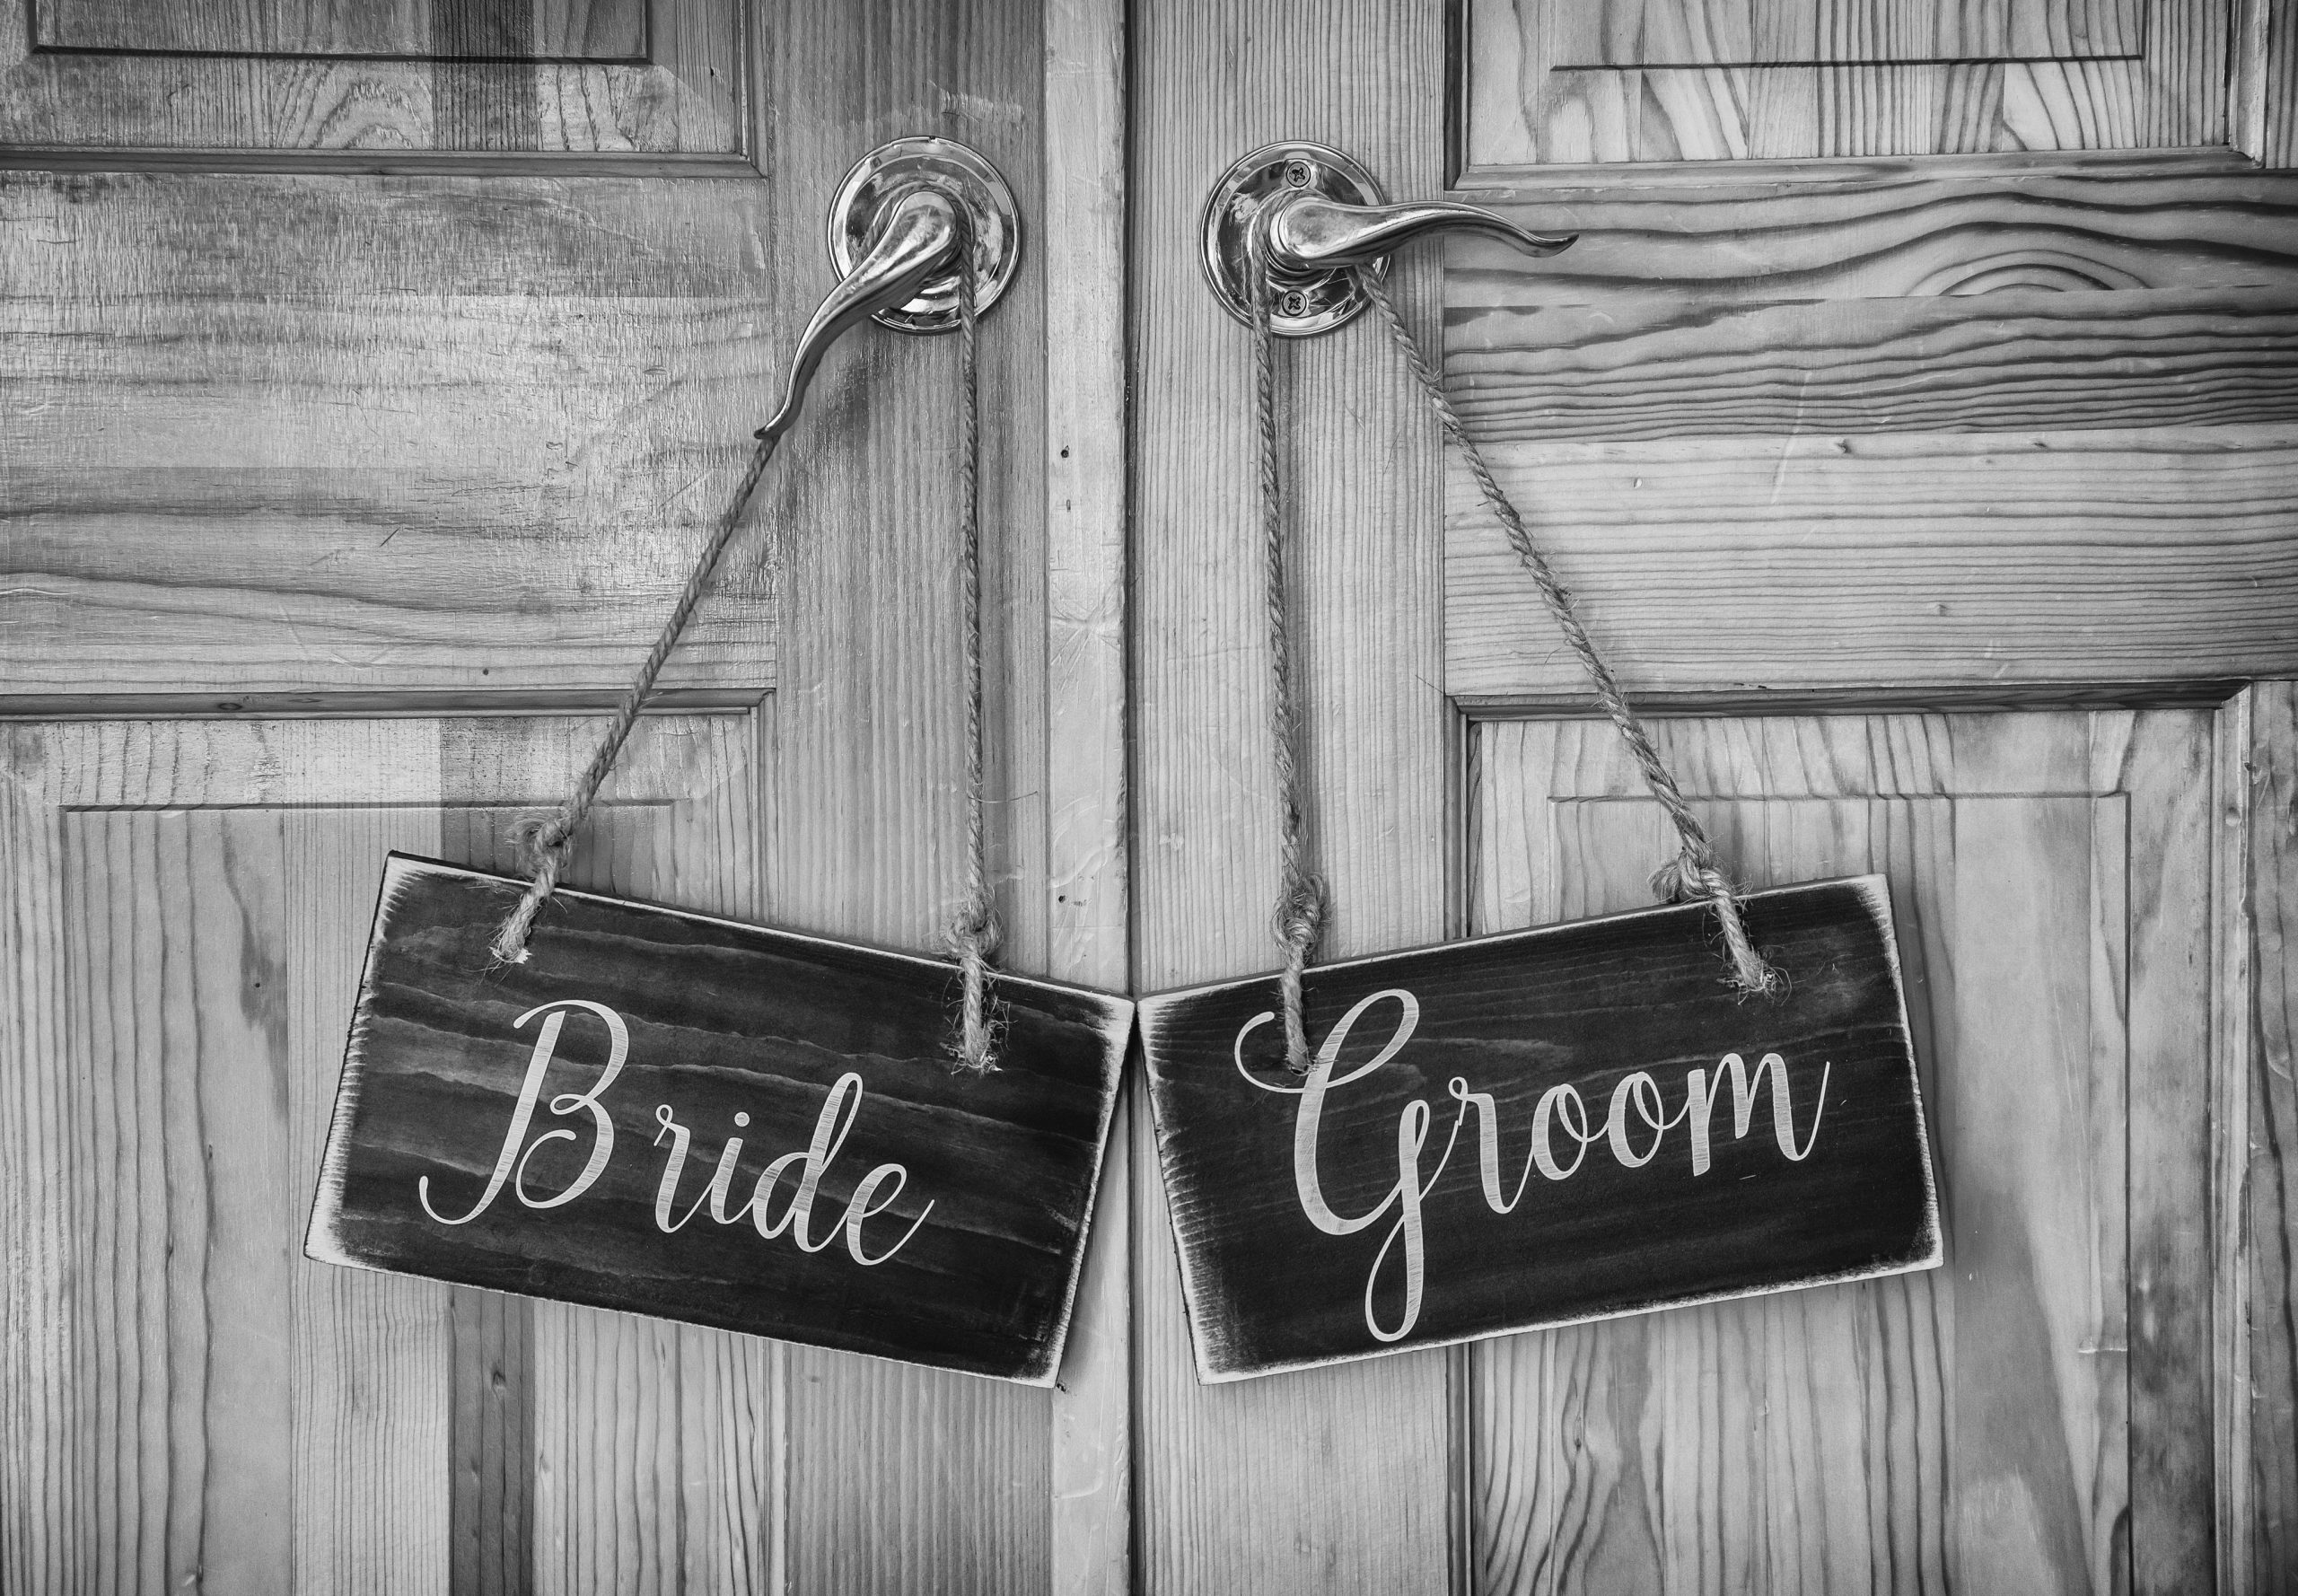 Bride and groom wooden signs for chairs at a wedding.